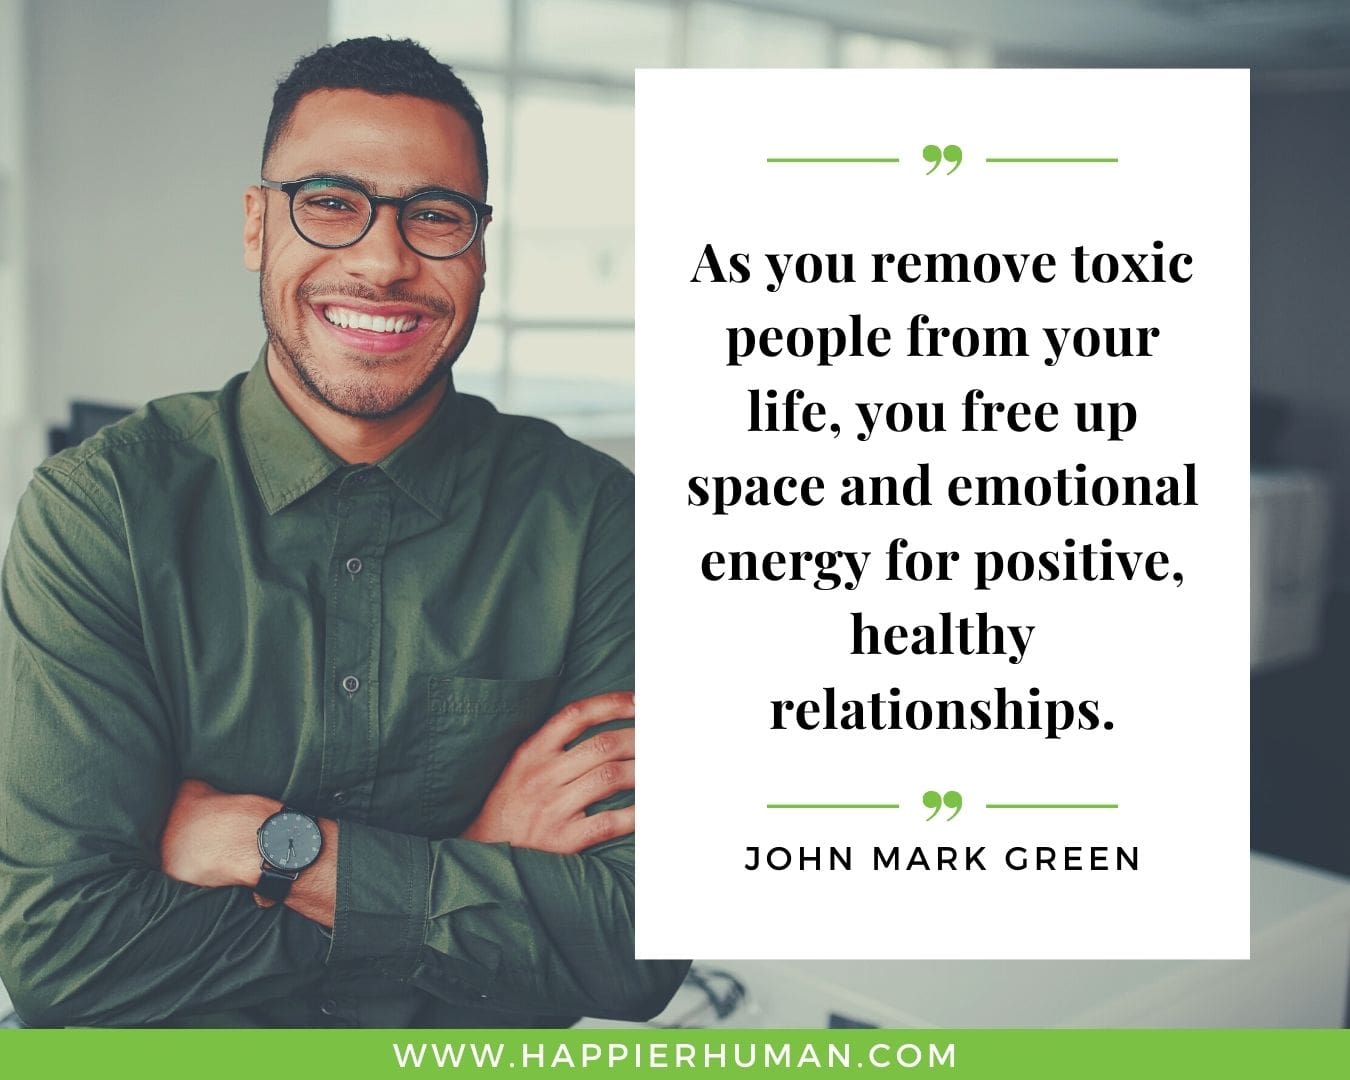 Toxic People Quotes - “As you remove toxic people from your life, you free up space and emotional energy for positive, healthy relationships.” – John Mark Green